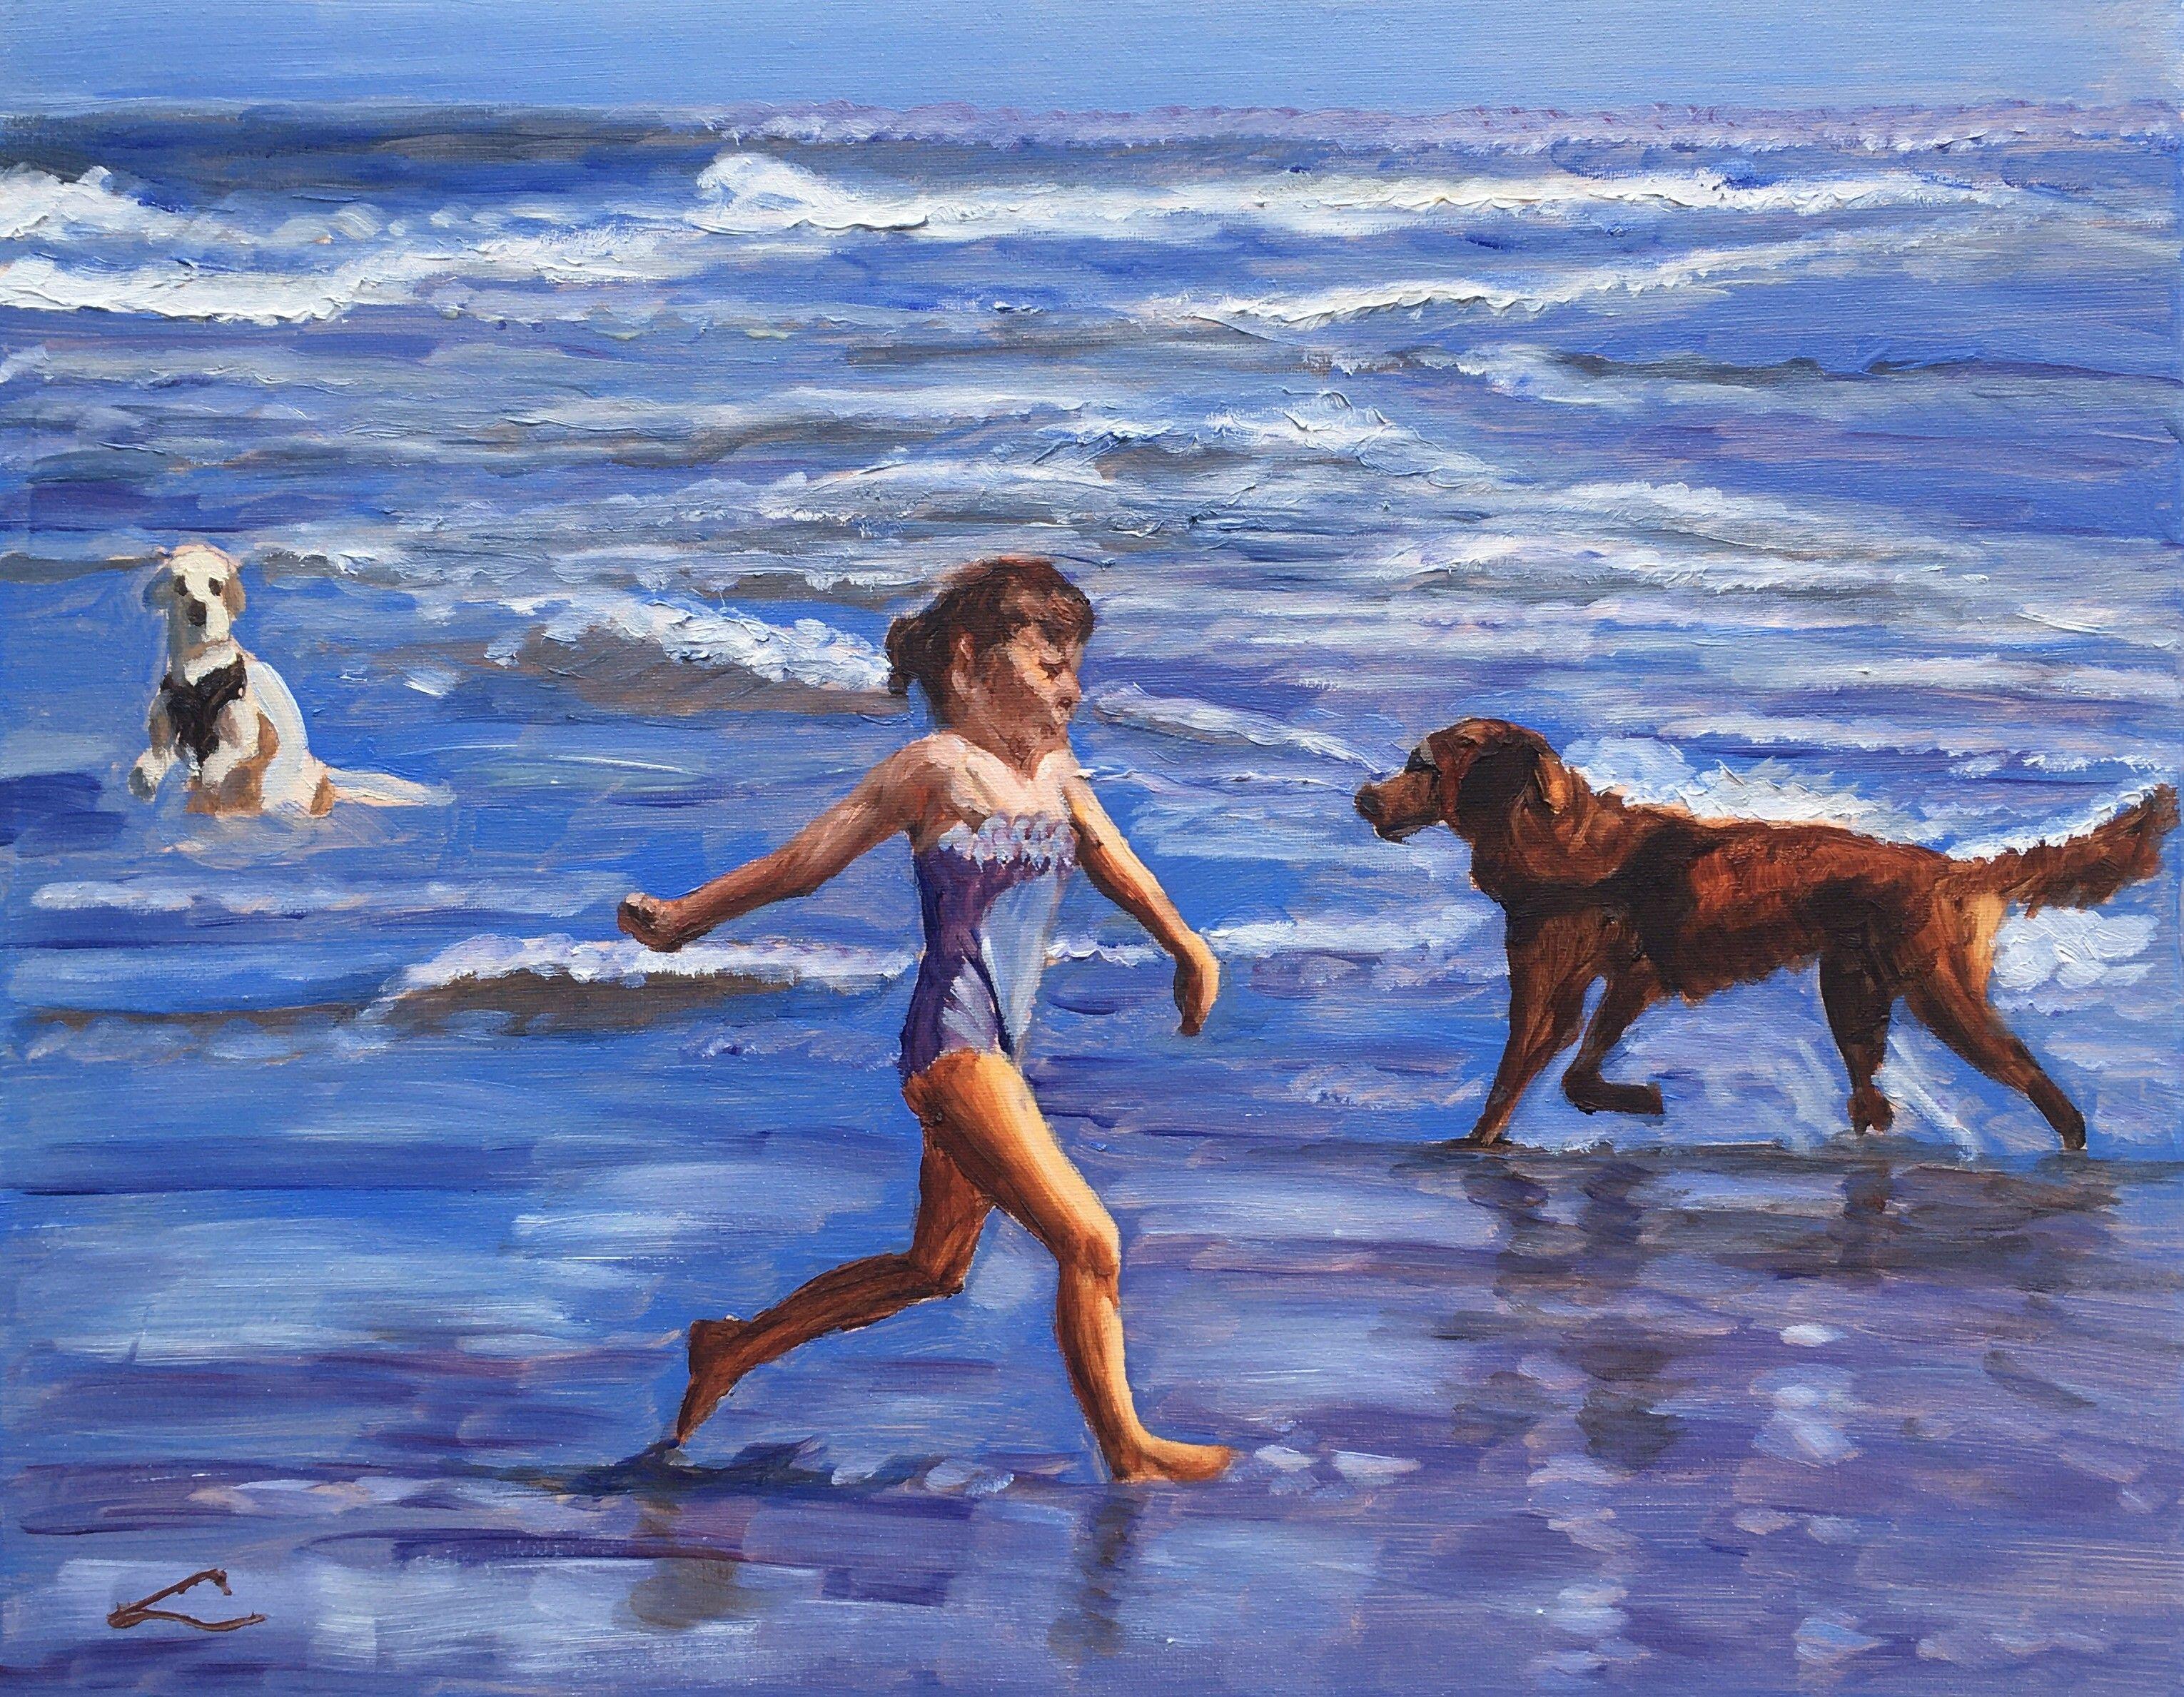 Alla prima oil painting with few final tuches when dry.Beautiful weather with a big shining sun. And I'm standing there taking it all in.The many spectacular sights jump at my eyes. Kids and dogs run around and splash each other I see happy children